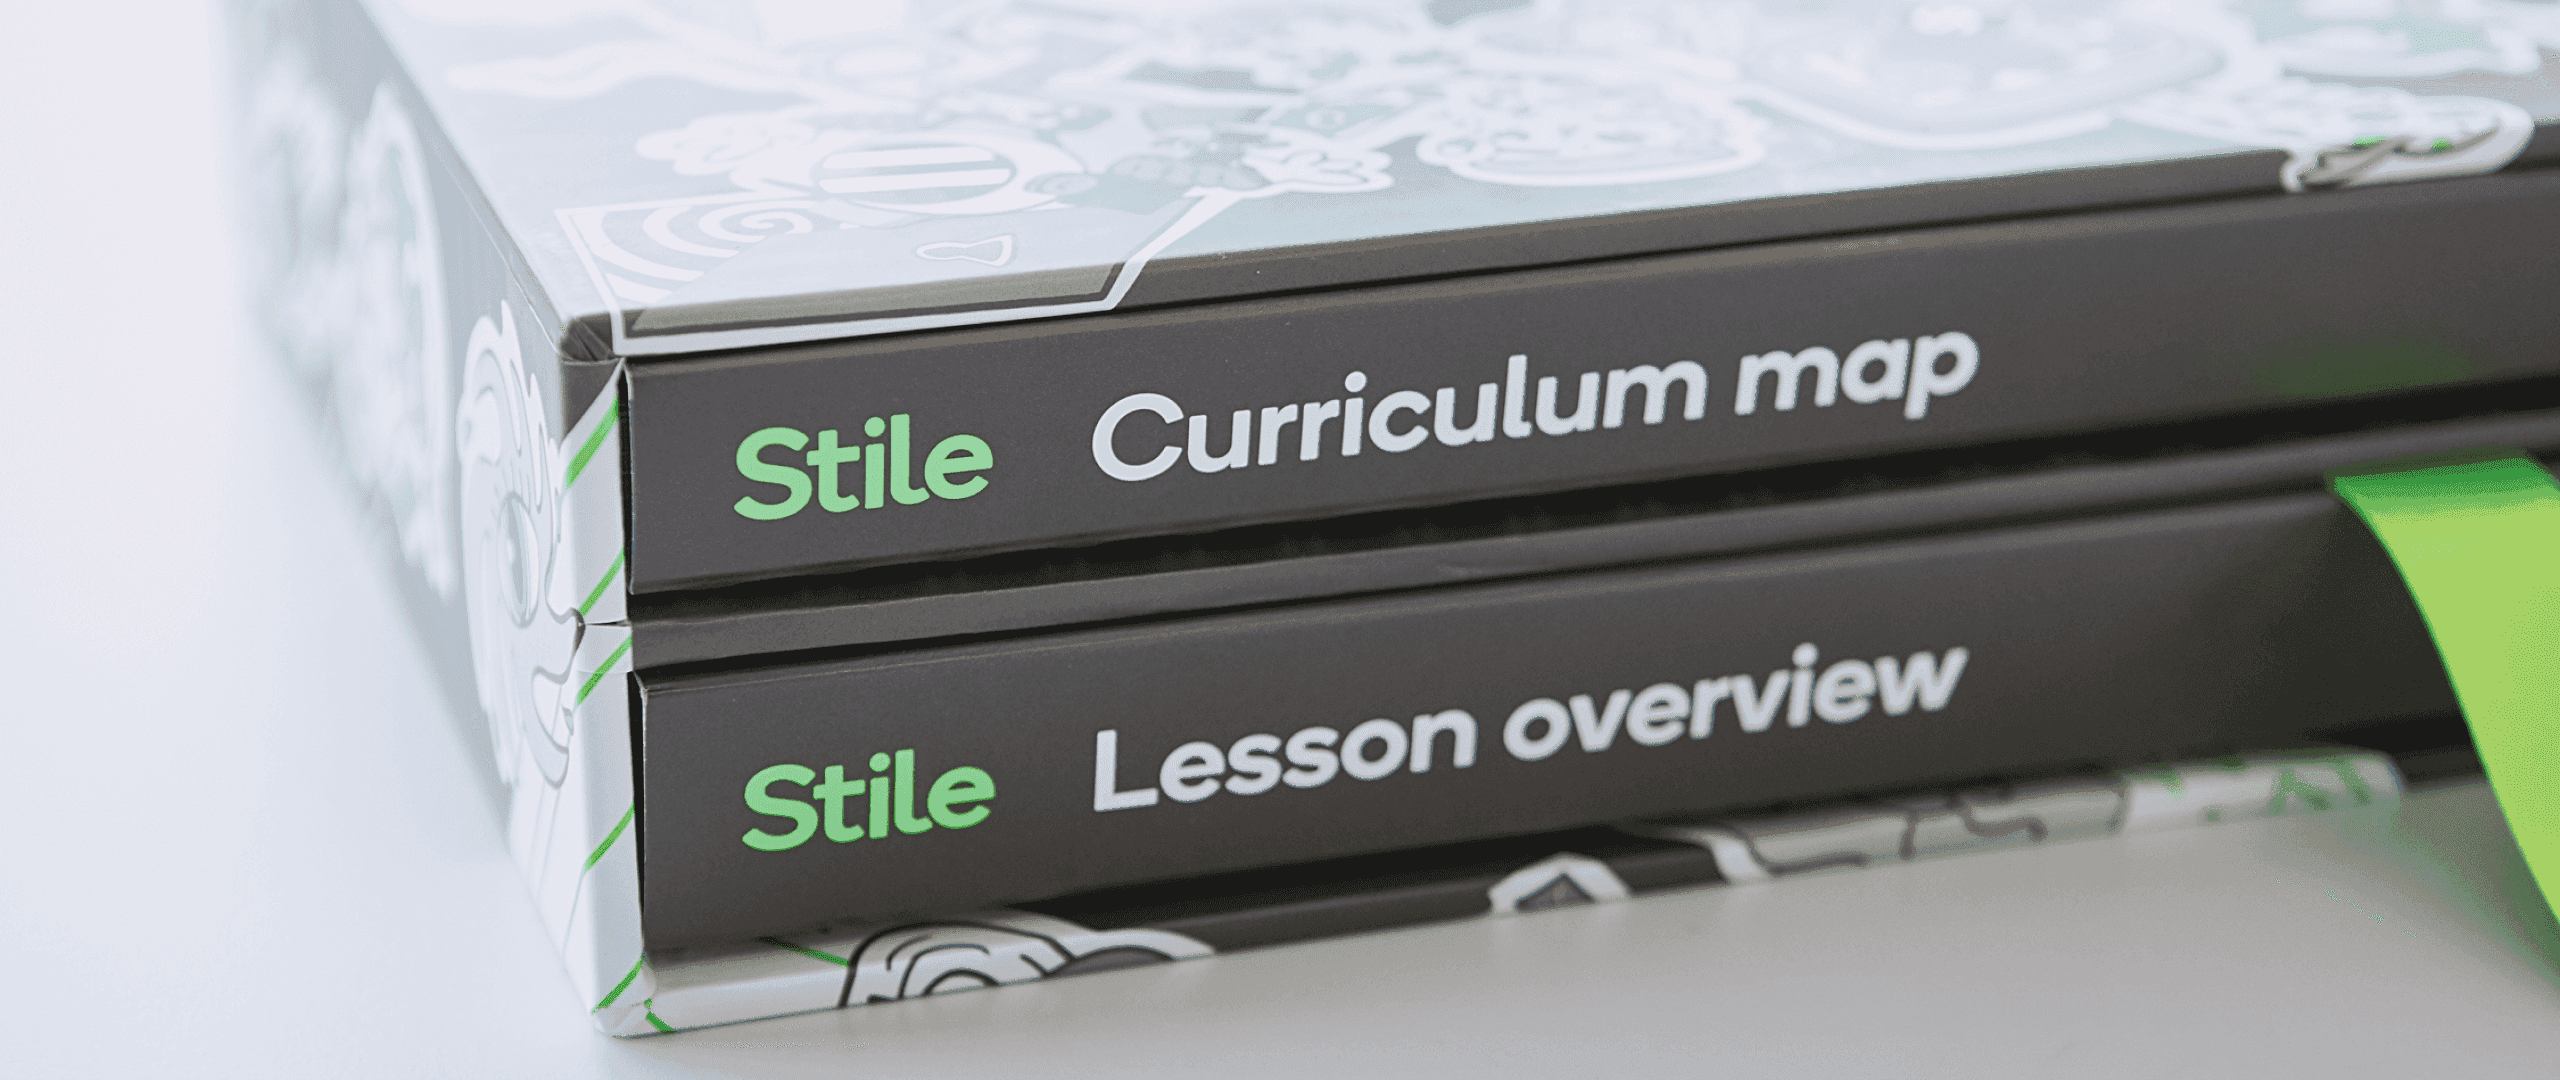 A collection of Stile teaching resource books on a table